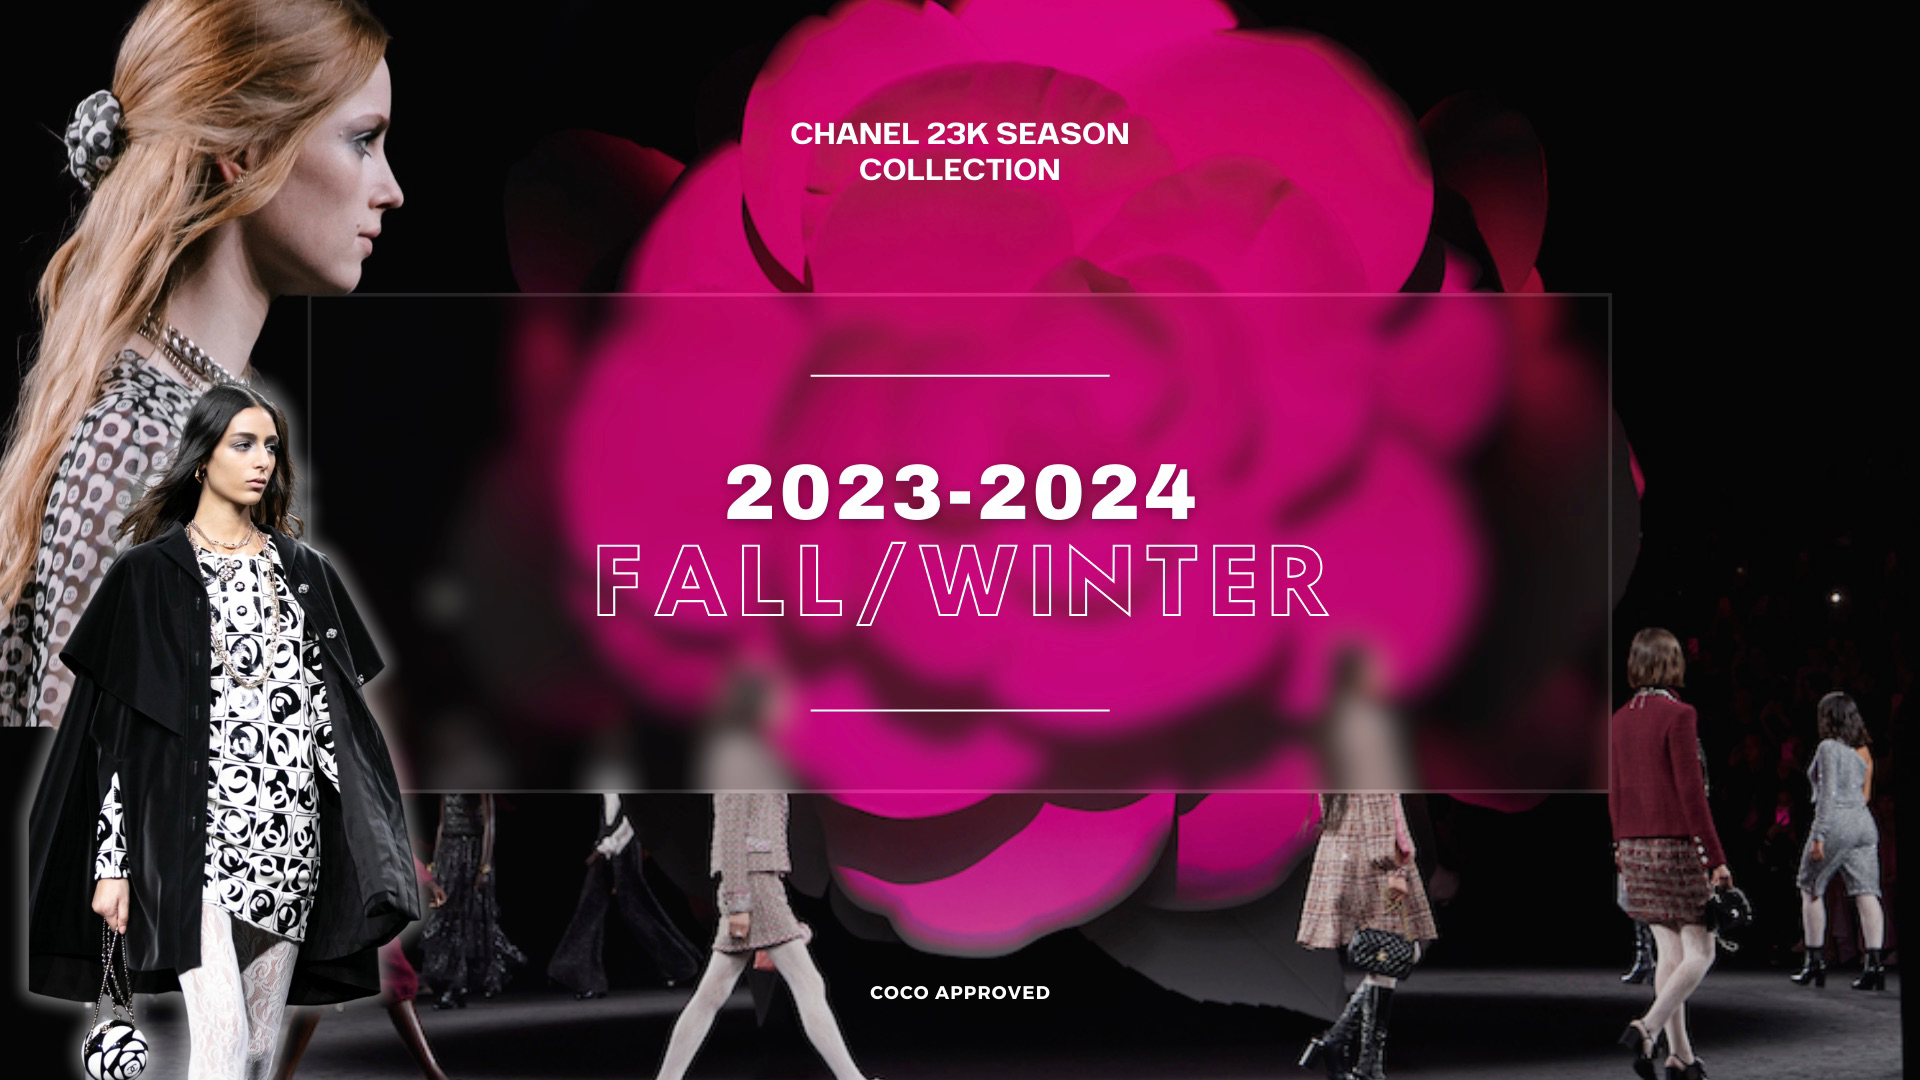 Camellia is taking over Chanel 2023-2024 Fall/Winter fashion